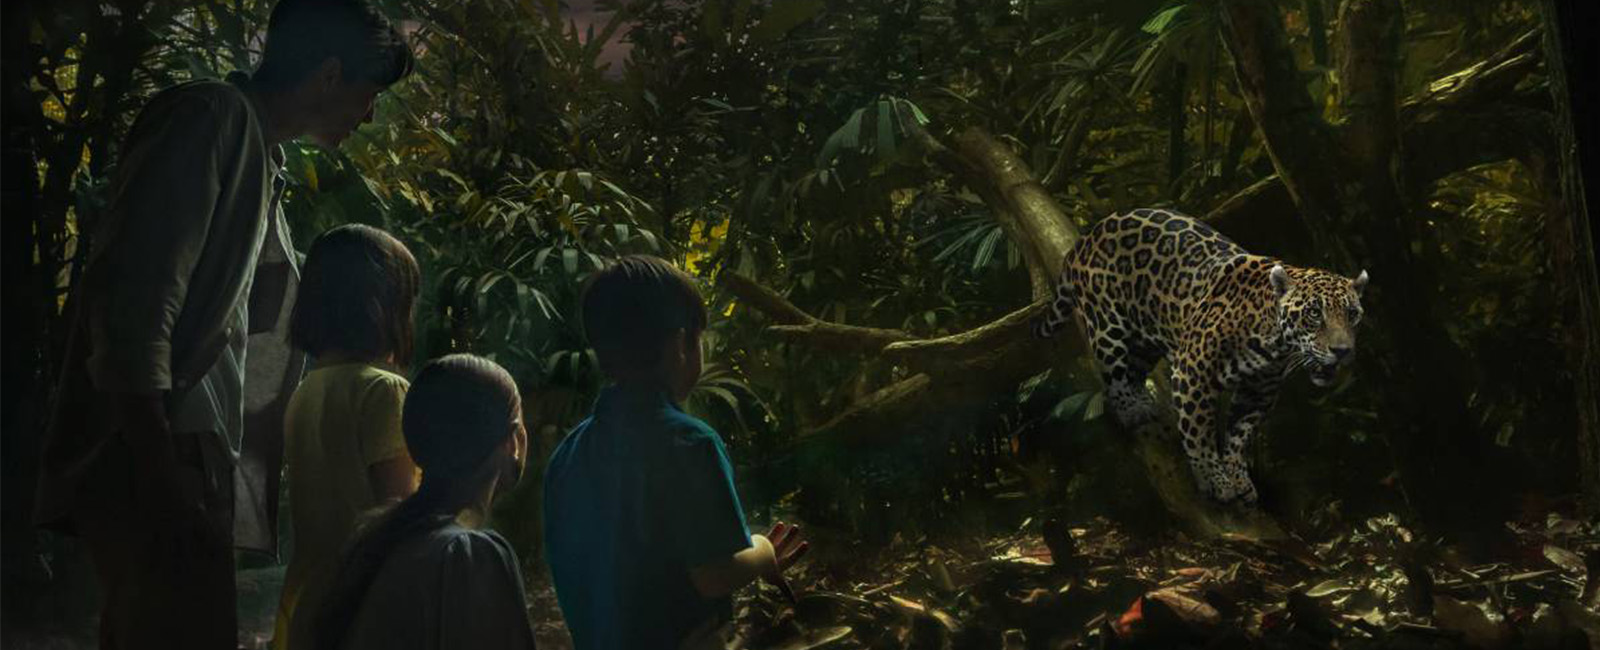 a family watches a leopard at a zoo. It is nighttime and dark